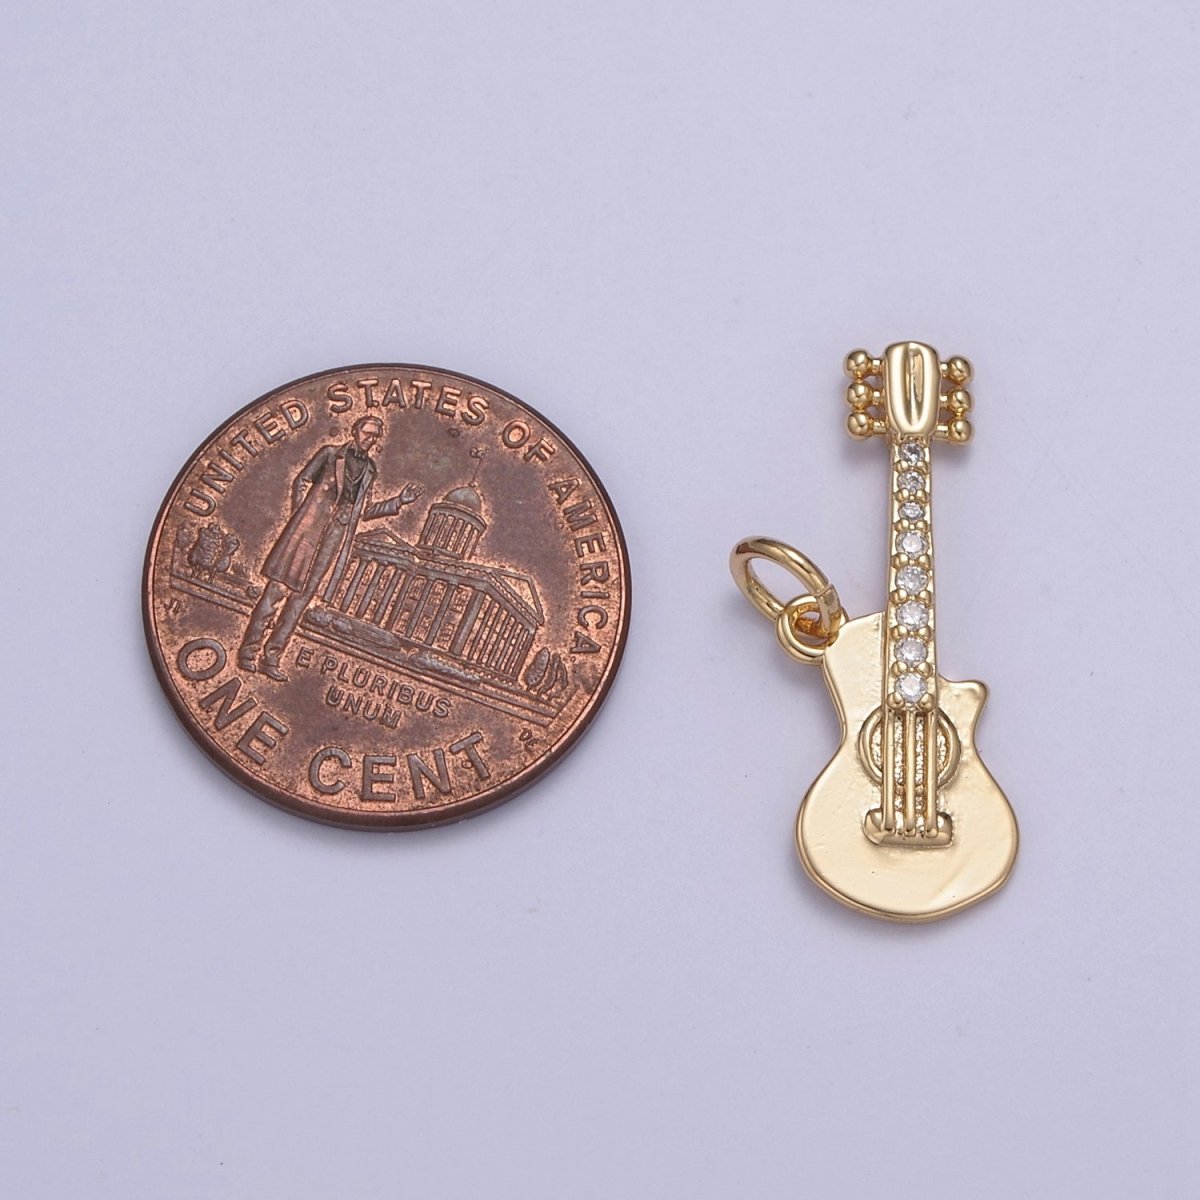 16k Gold Filled Rock n Roll Tiny Guitar Charm Musician Guitarist with CZ Pendant Necklace N-429 - DLUXCA